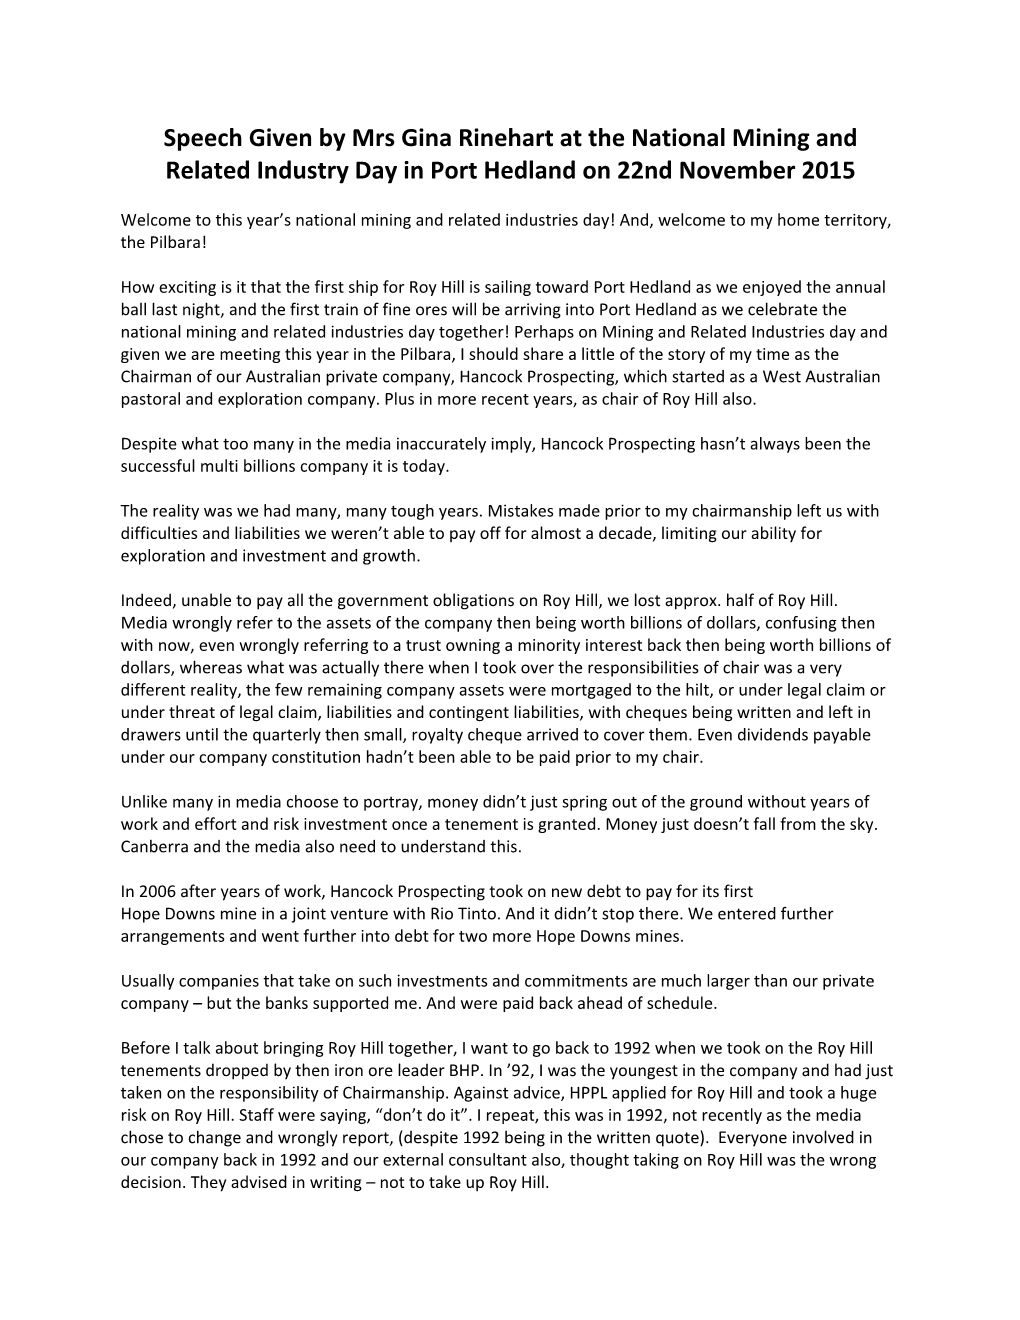 Speech Given by Mrs Gina Rinehart at the National Mining and Related Industry Day in Port Hedland on 22Nd November 2015